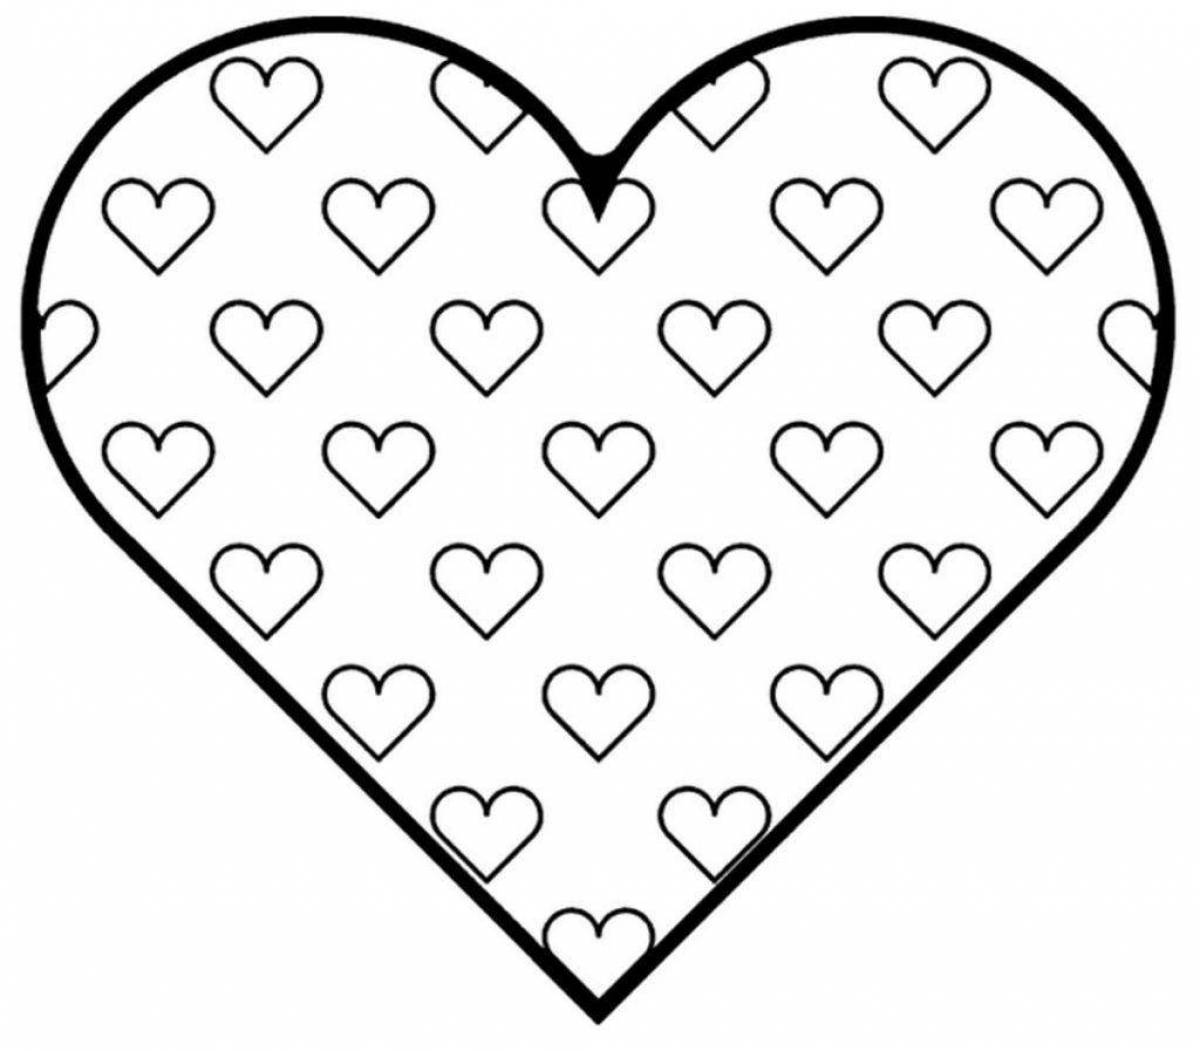 Colorful valentine's coloring page